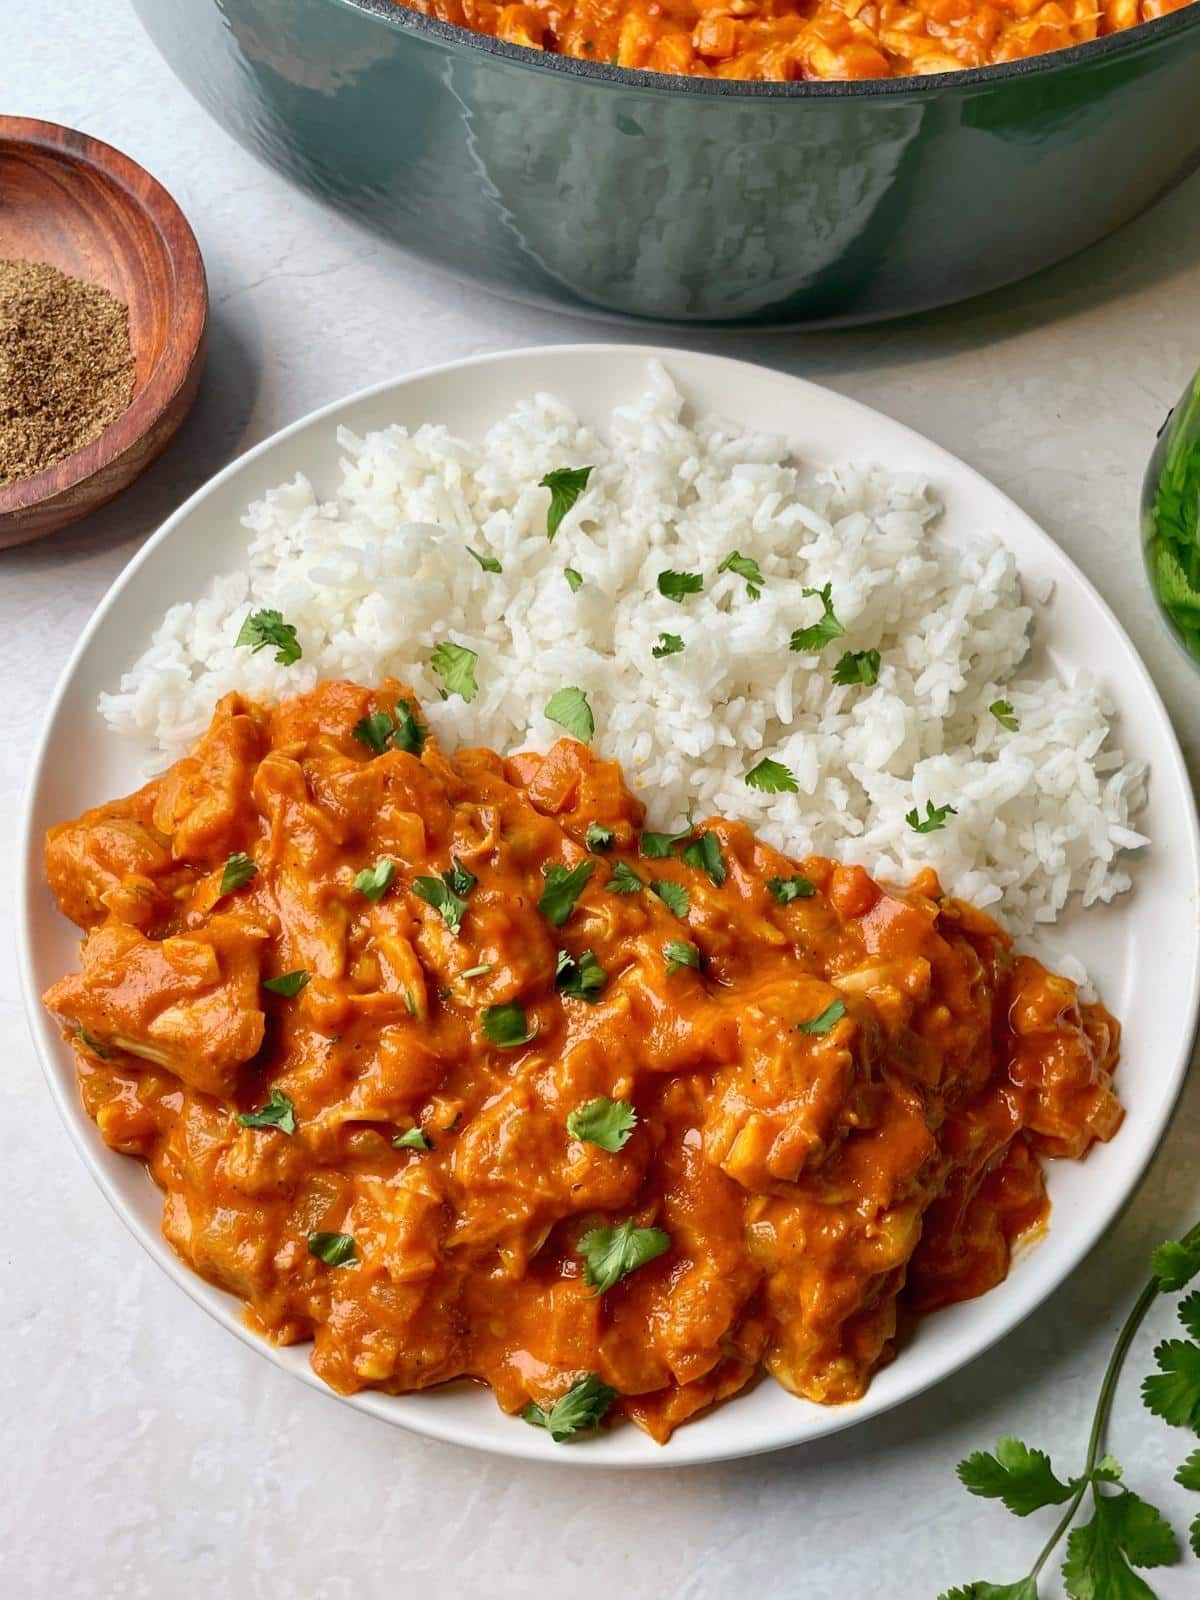 Tikka masala with a side of rice.